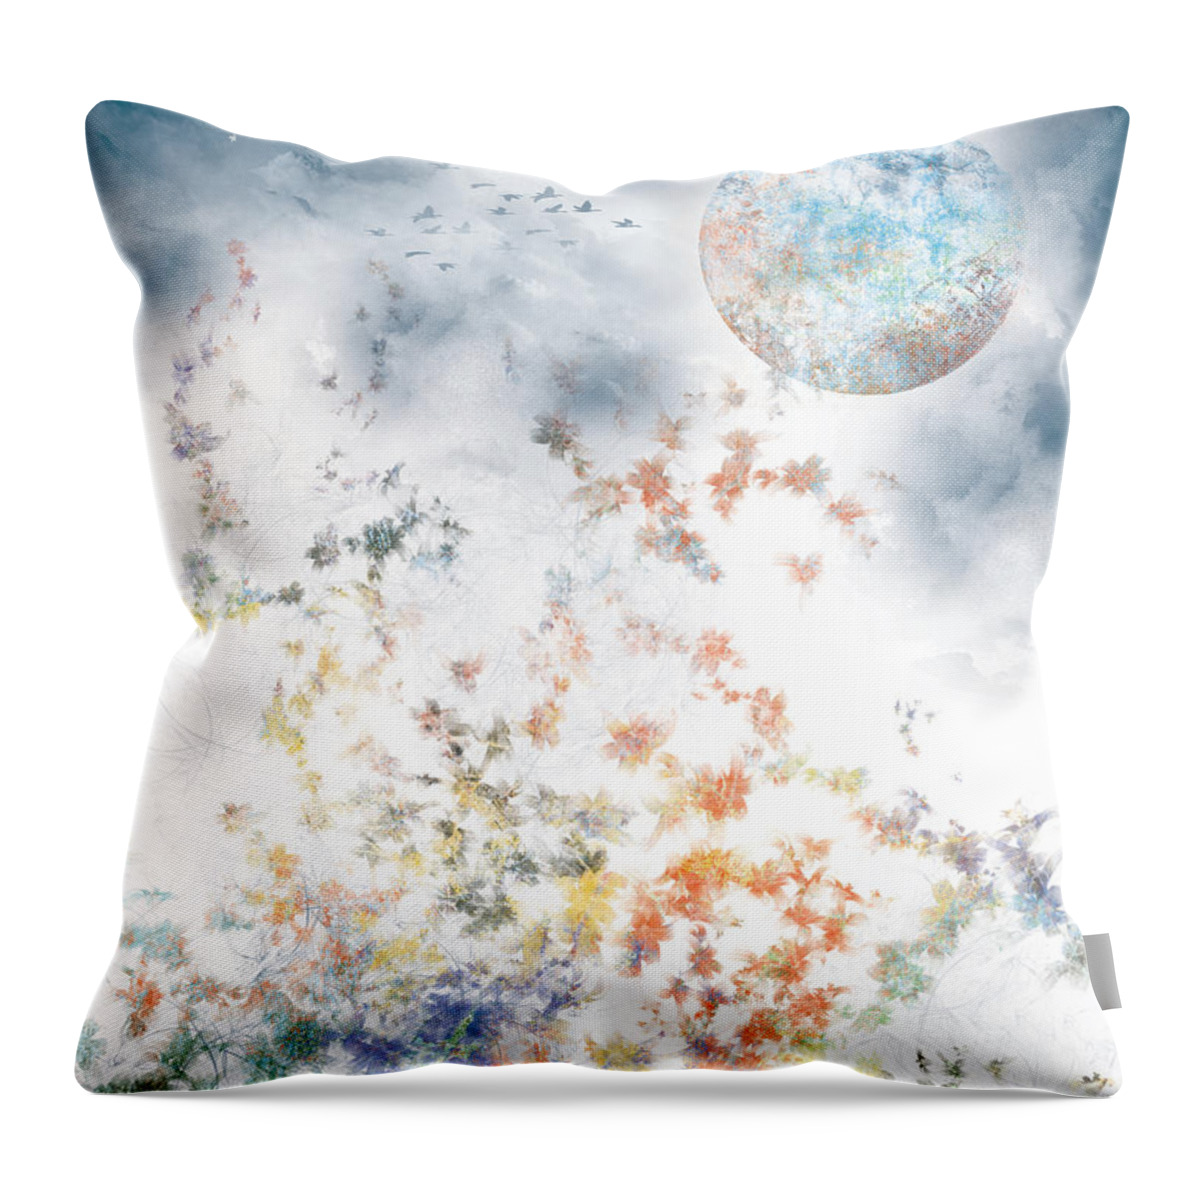 Vision Throw Pillow featuring the digital art Vision by Trilby Cole